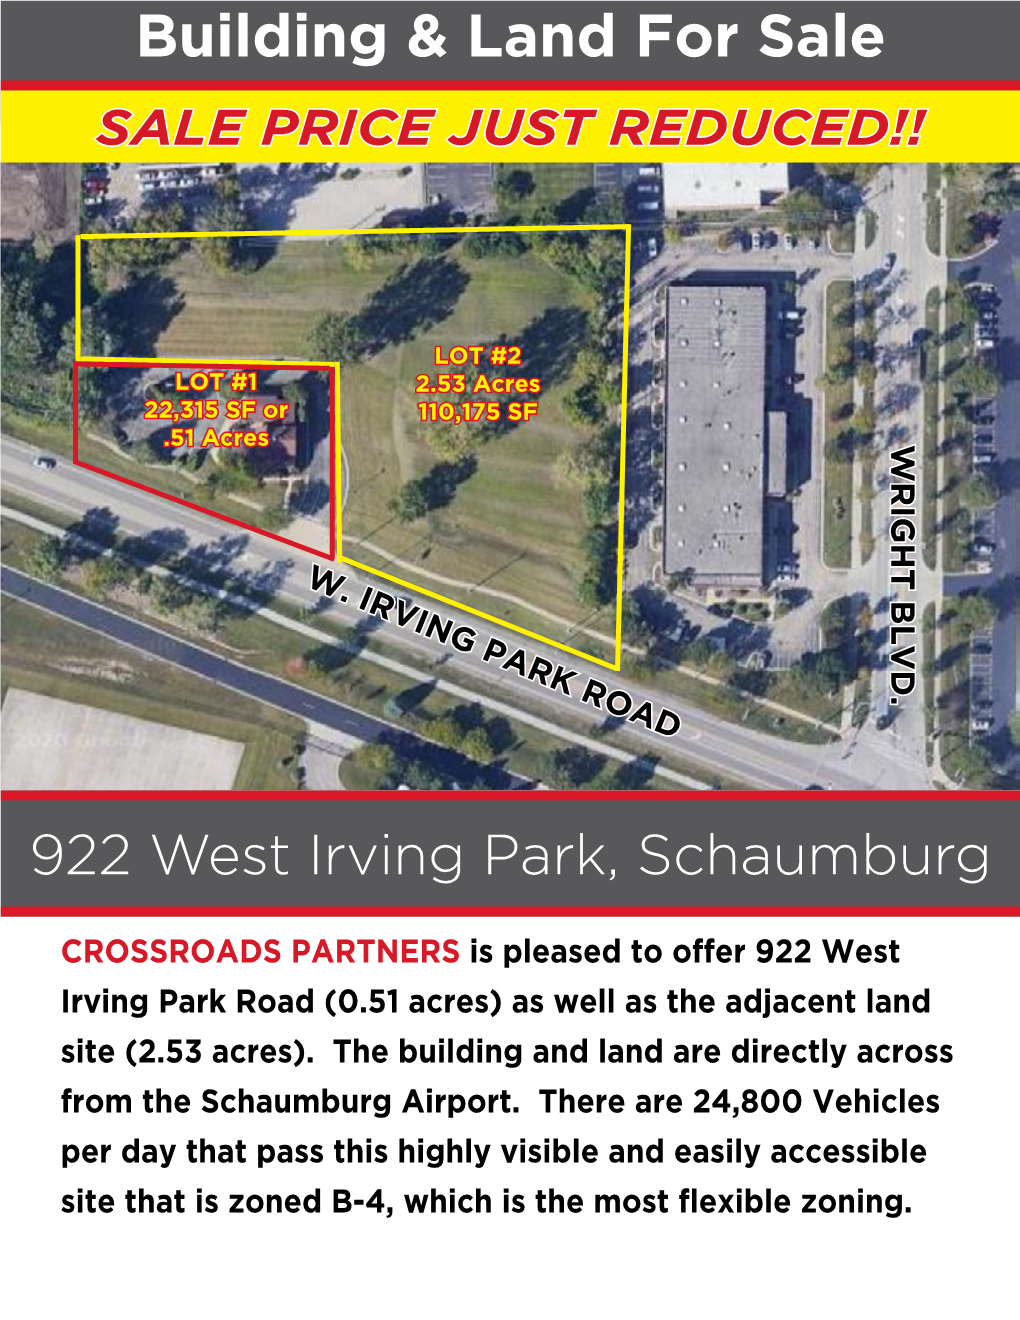 W. IRVING PARK ROAD WRIGHT BLVD. Building & Land for Sale